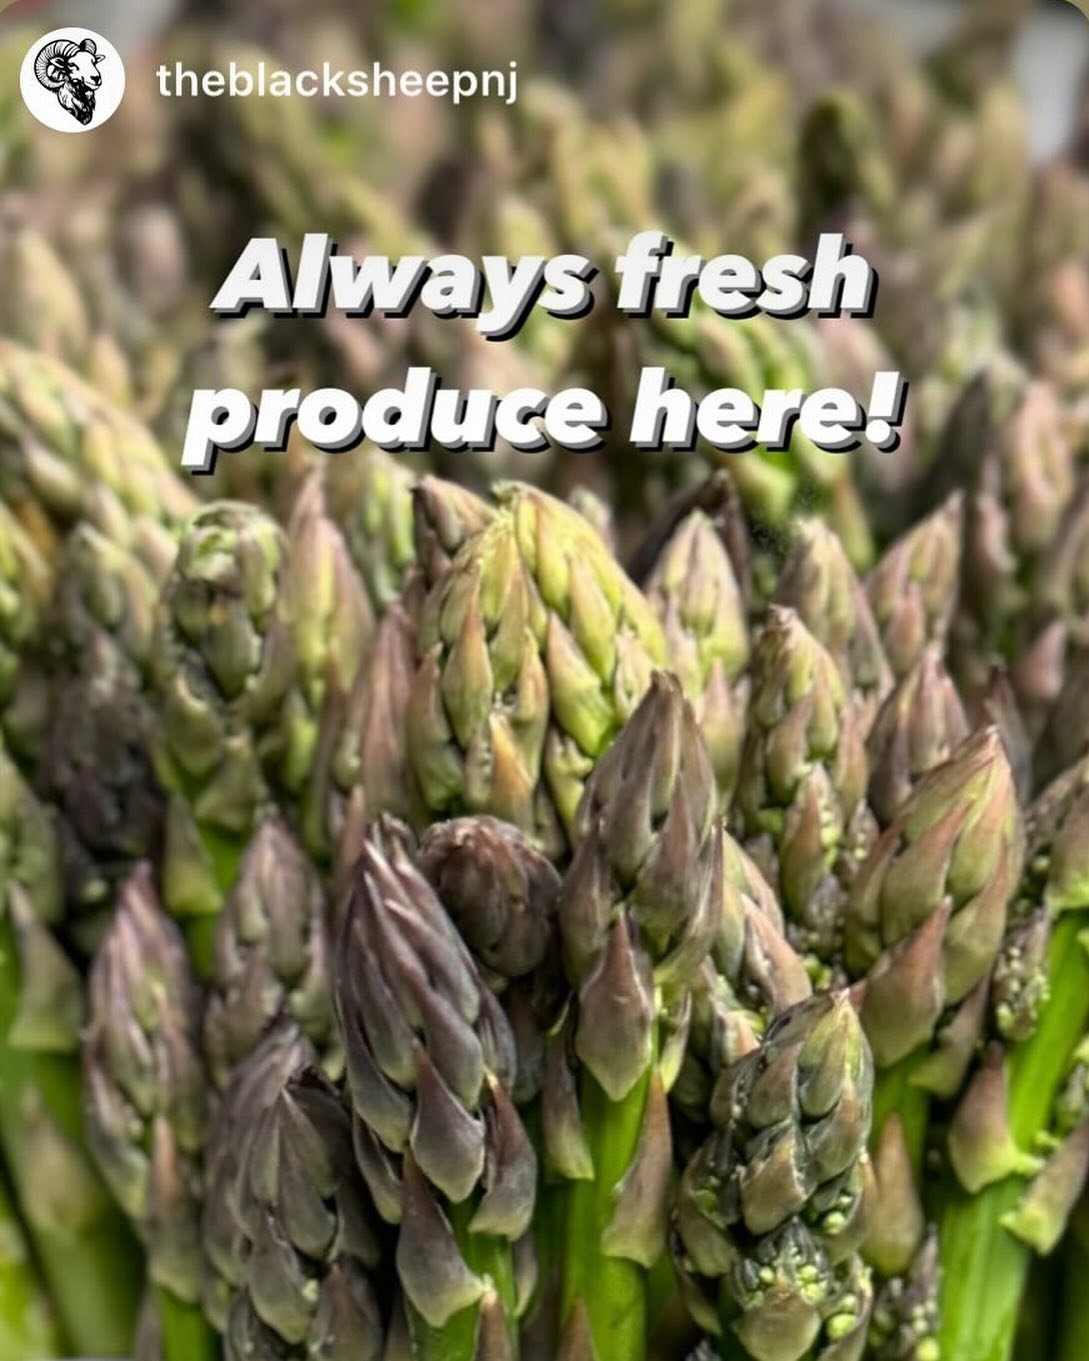 Nothing like @jerseyfreshnjda #asparagus! Did you know NJ is the 4th largest grower of asparagus in the nation? Get it while it&rsquo;s 🔥